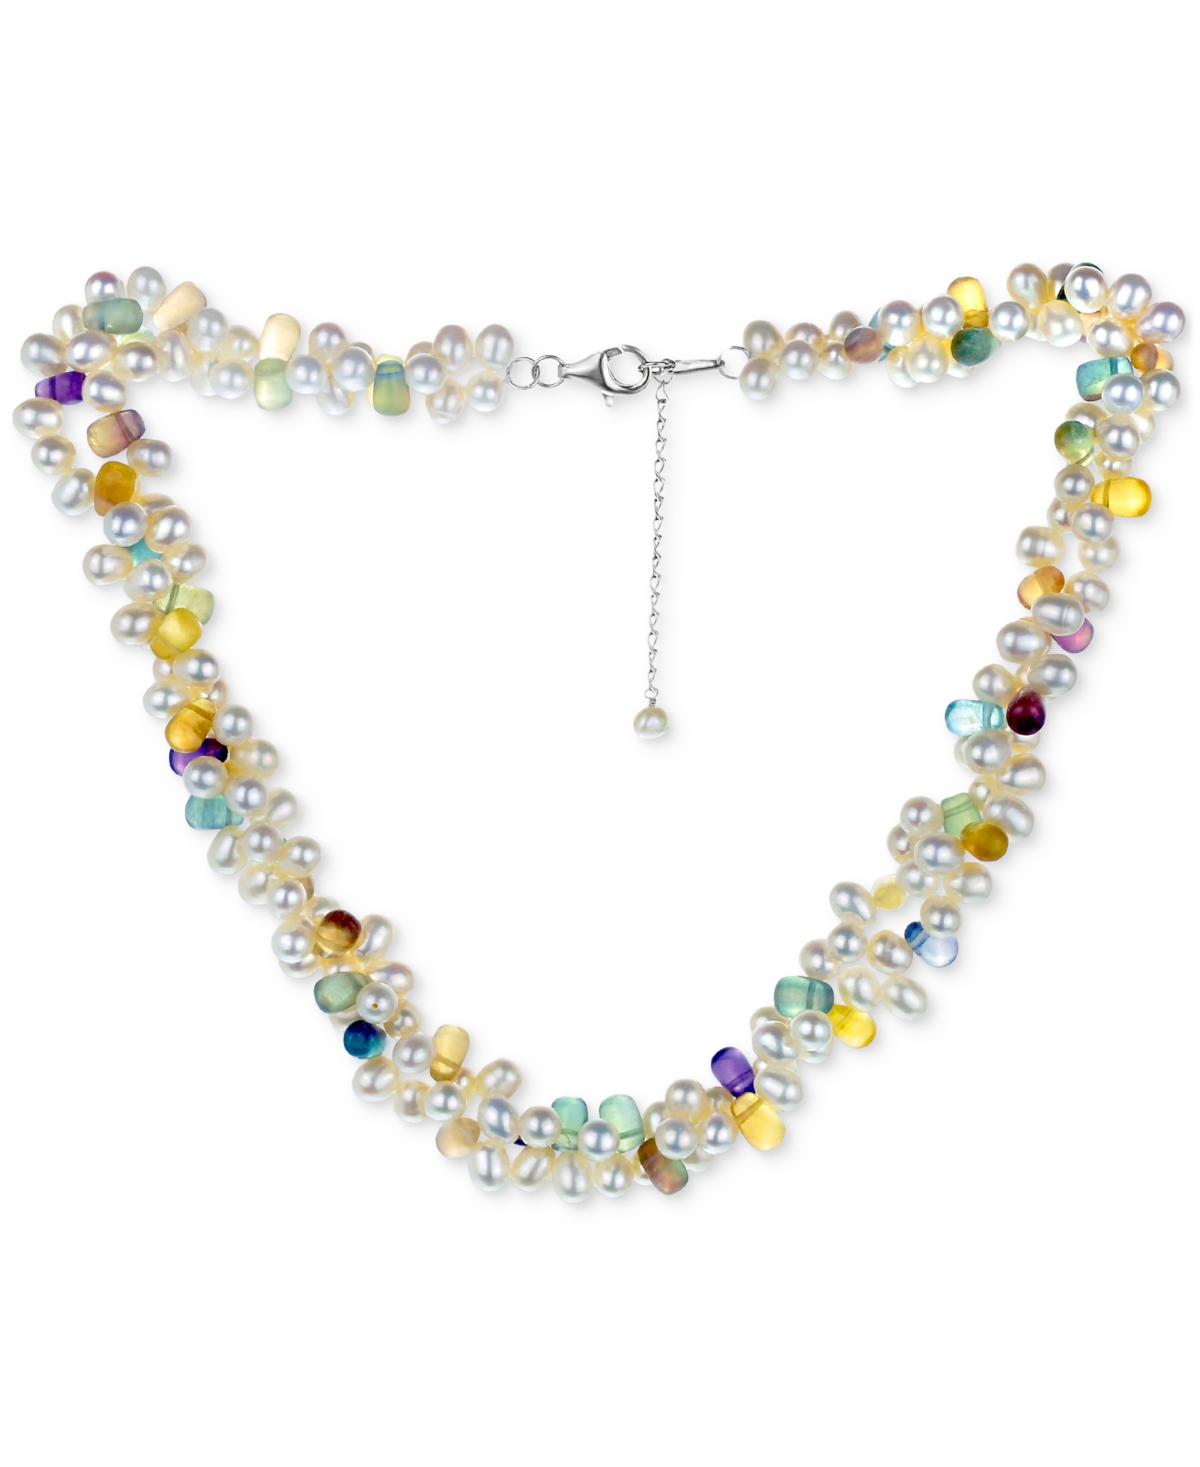 Freshwater Pearl (5-6mm) & Multicolor Fluorite Crystal Collar Necklace, 17" + 2" extender - Fluorite